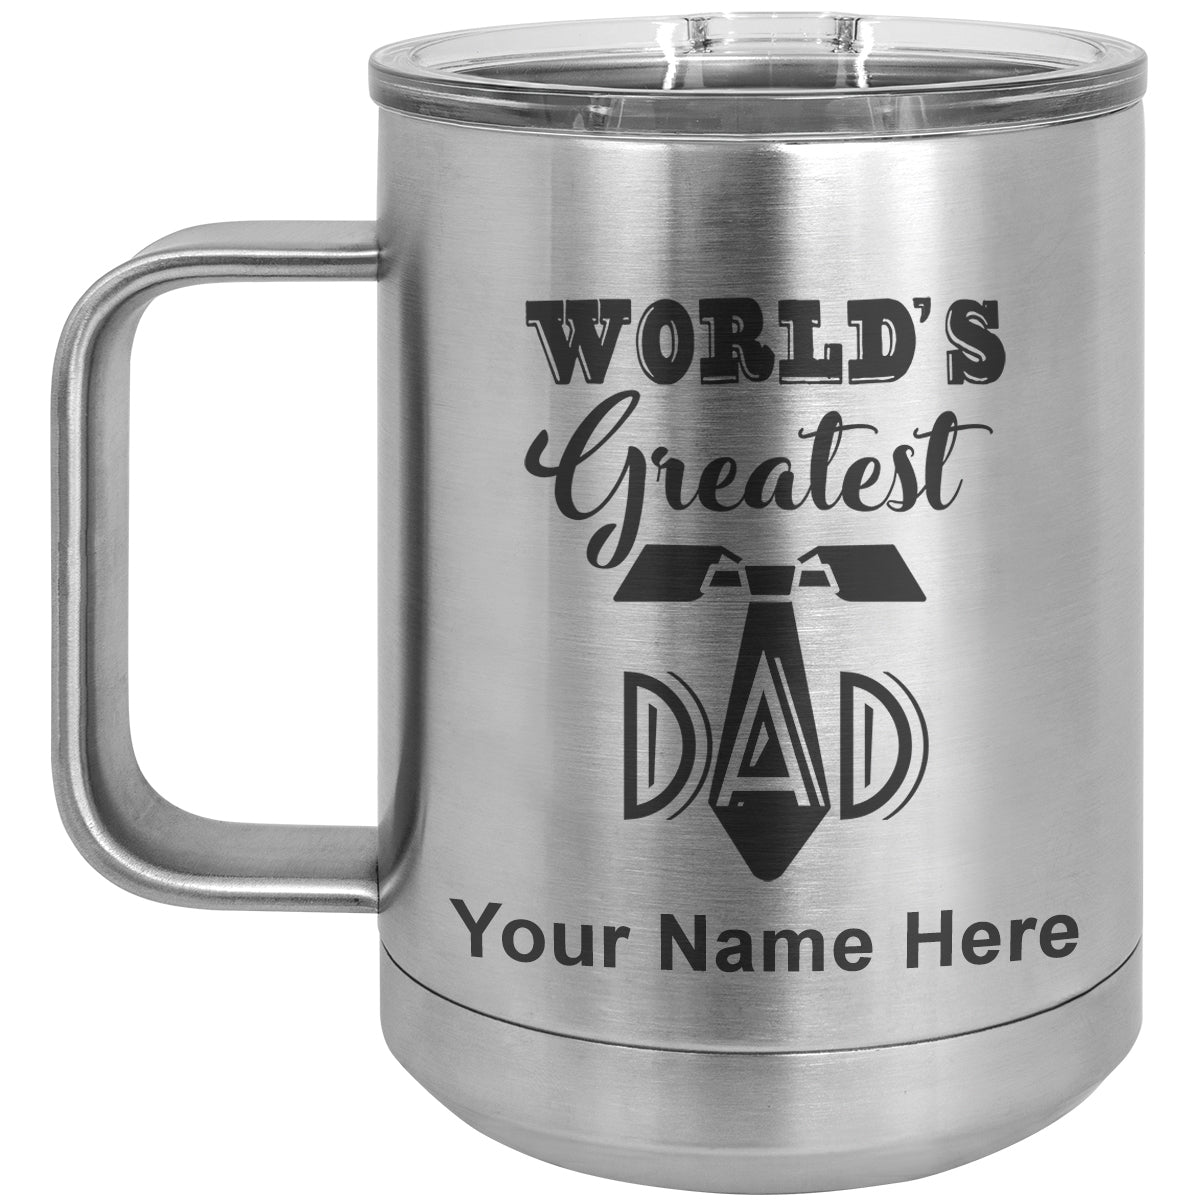 15oz Vacuum Insulated Coffee Mug, World's Greatest Dad, Personalized Engraving Included